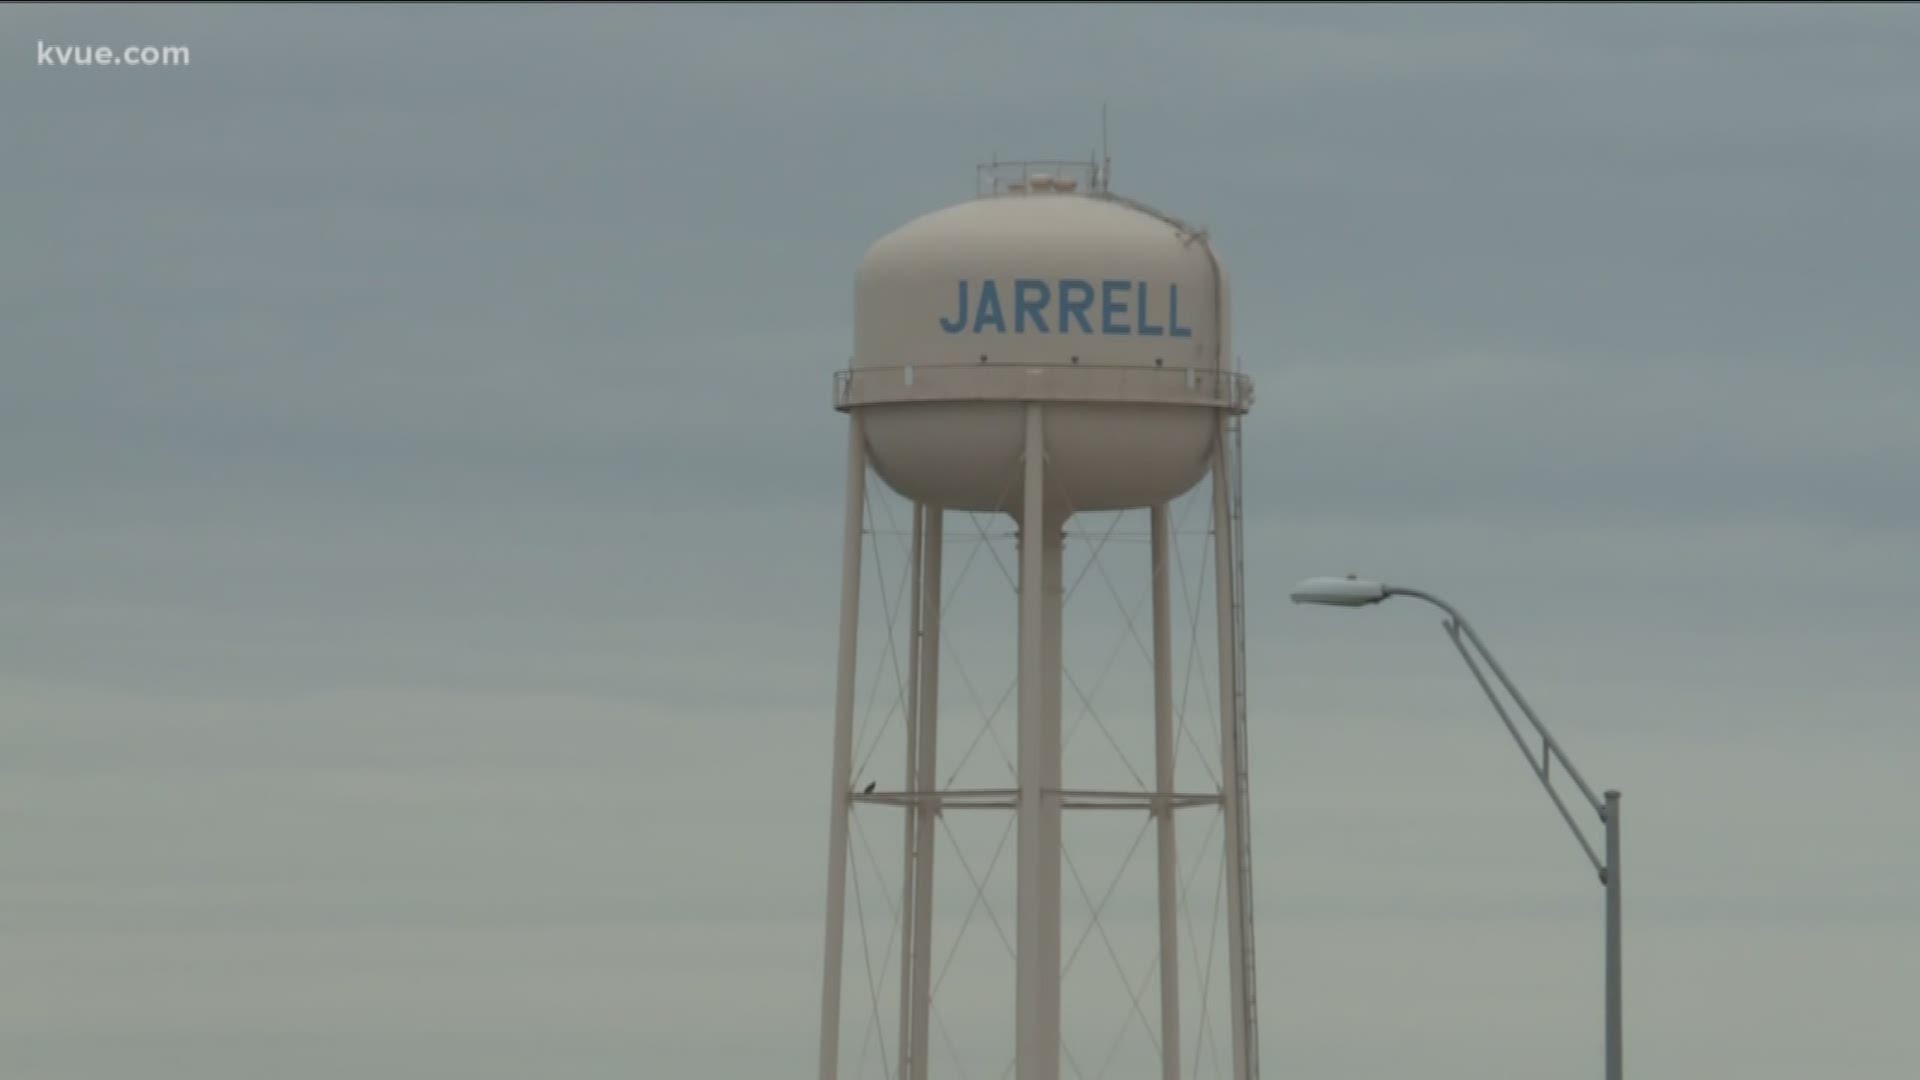 Back in 1997, Jarrell, Texas, was a town of just a few hundred people. Now, the latest census data shows the City of Jarrell now has more than 2,300 people.